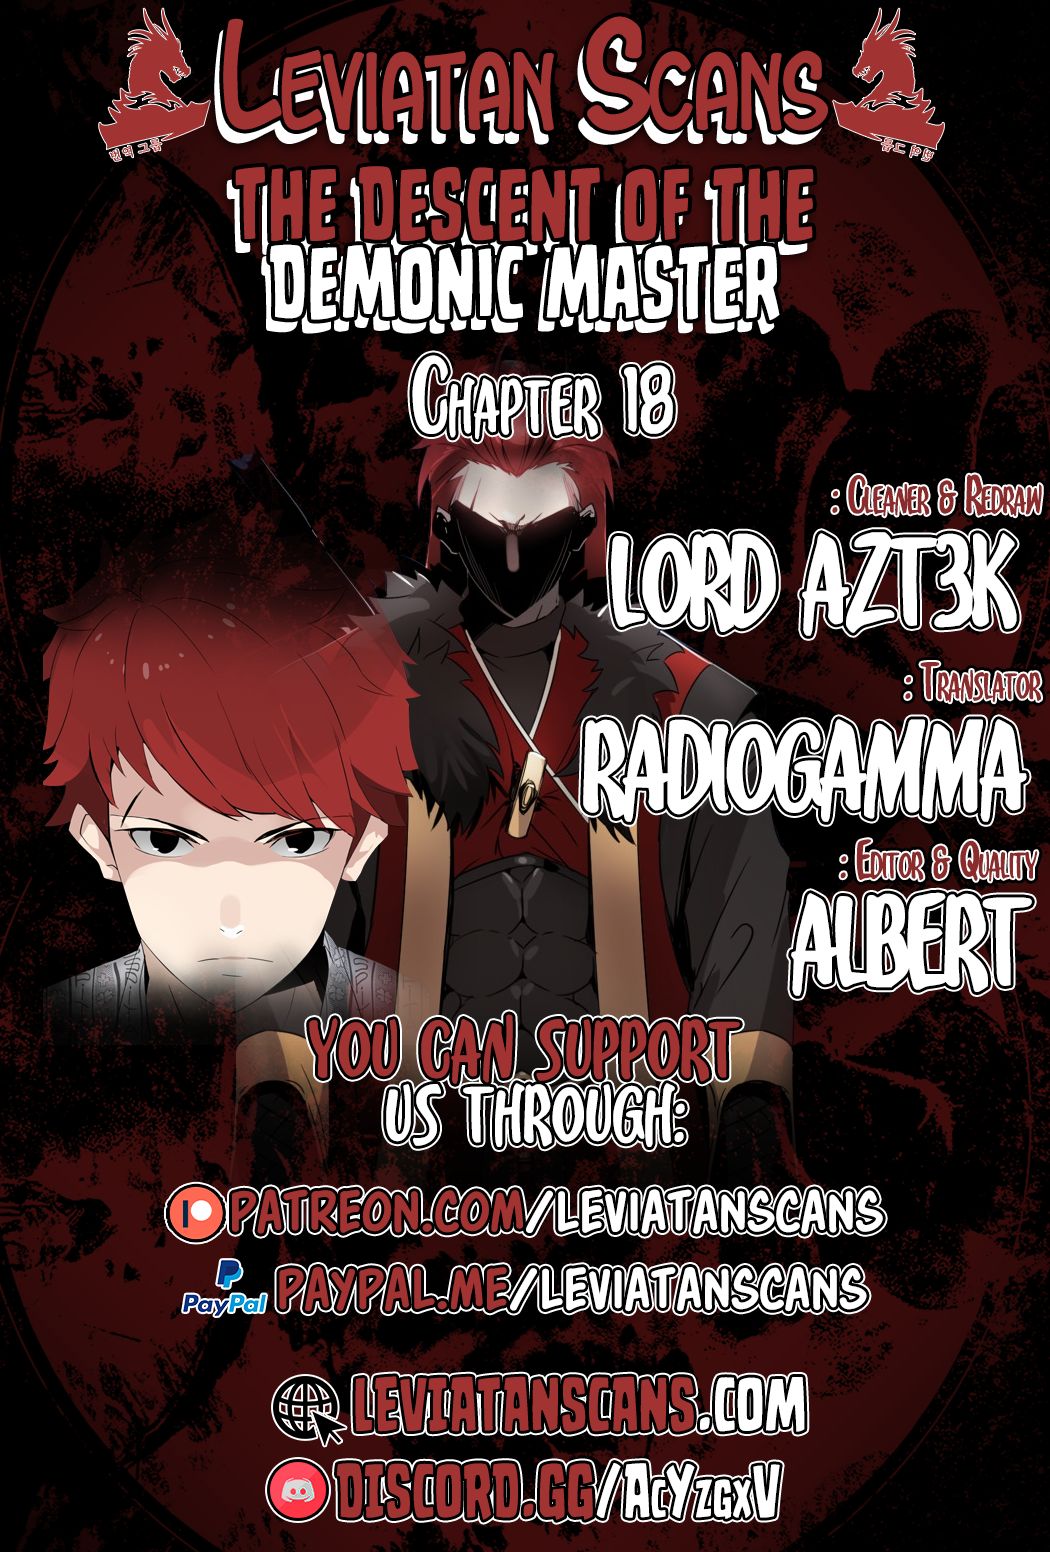 The Descent of the Demonic Master Chapter 18